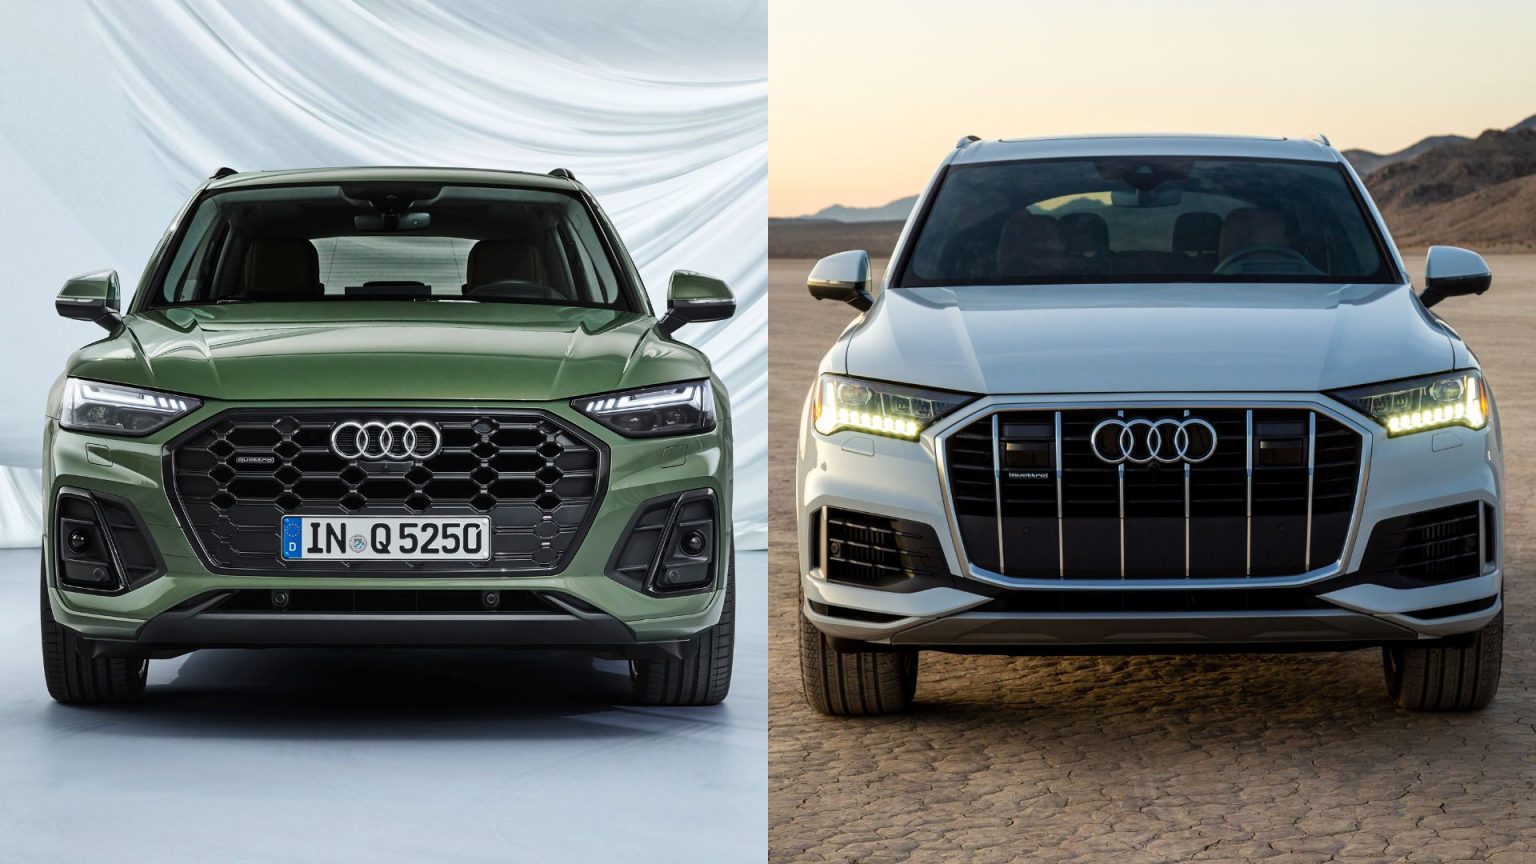 Audi Q5 vs Q7 What’s The Difference? Motorborne